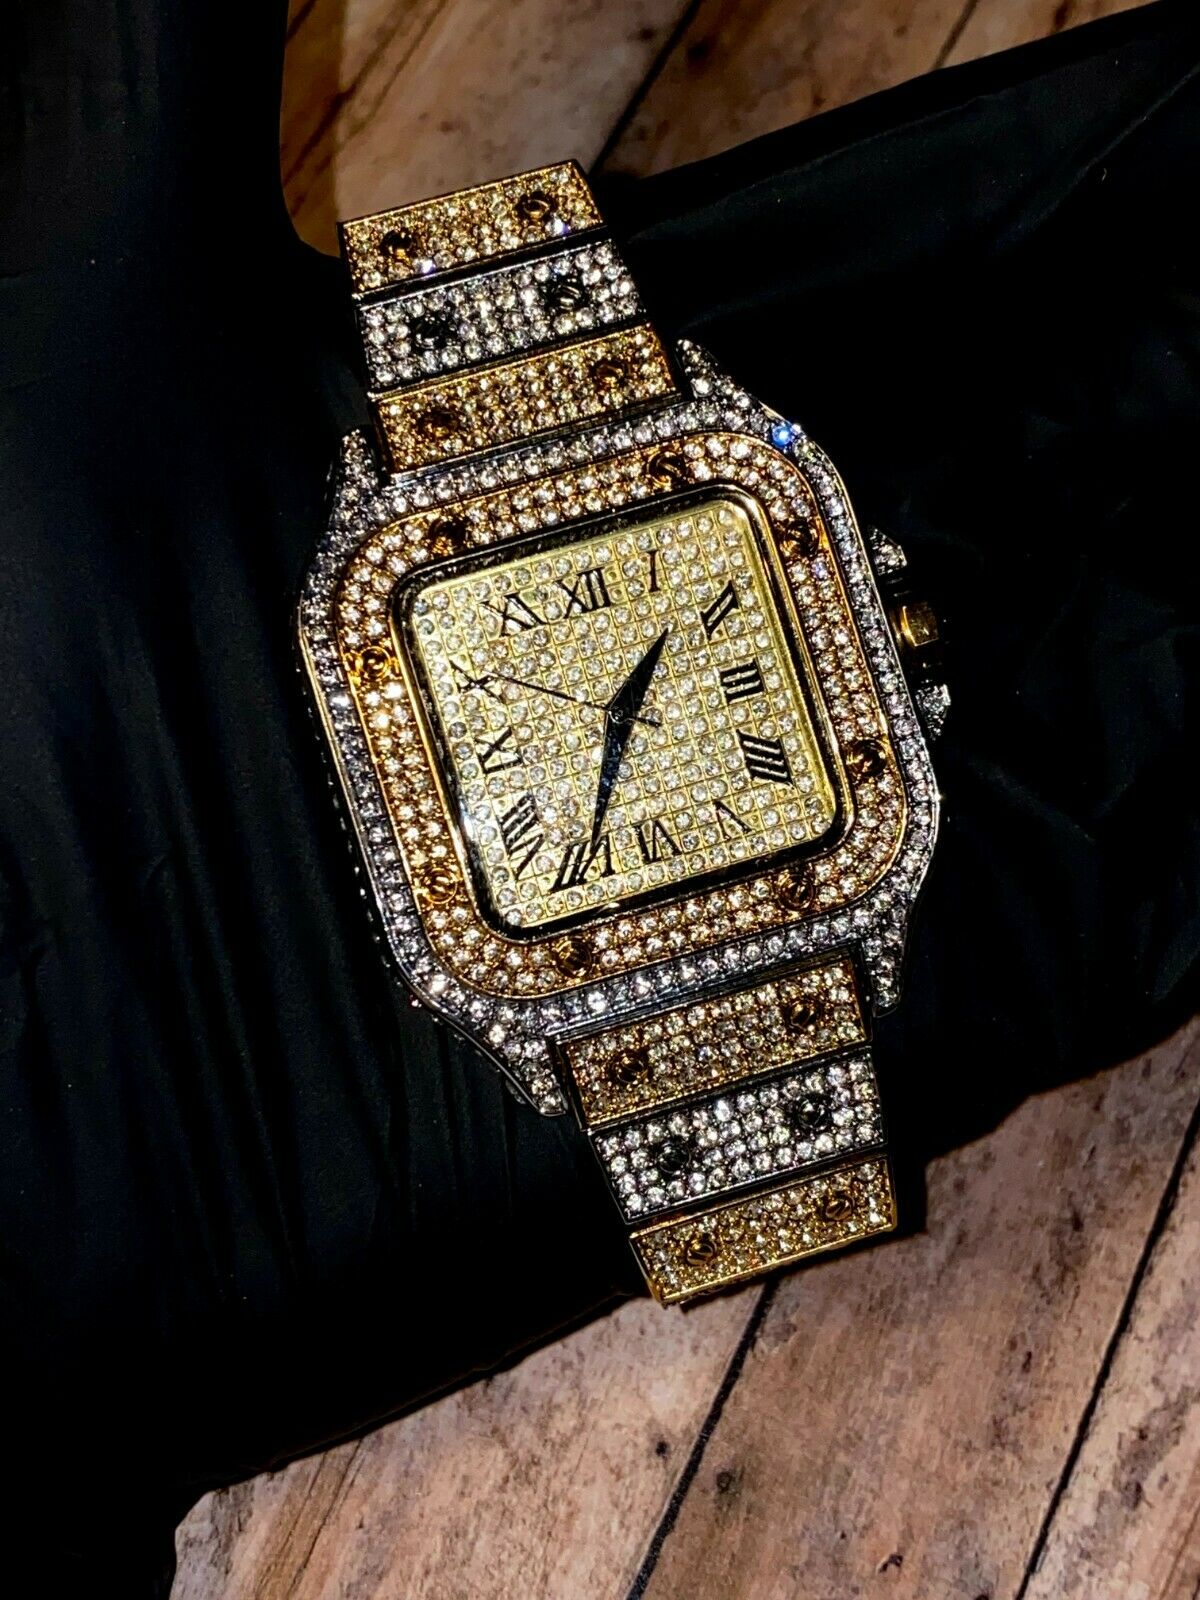 Icey Imperial Watch